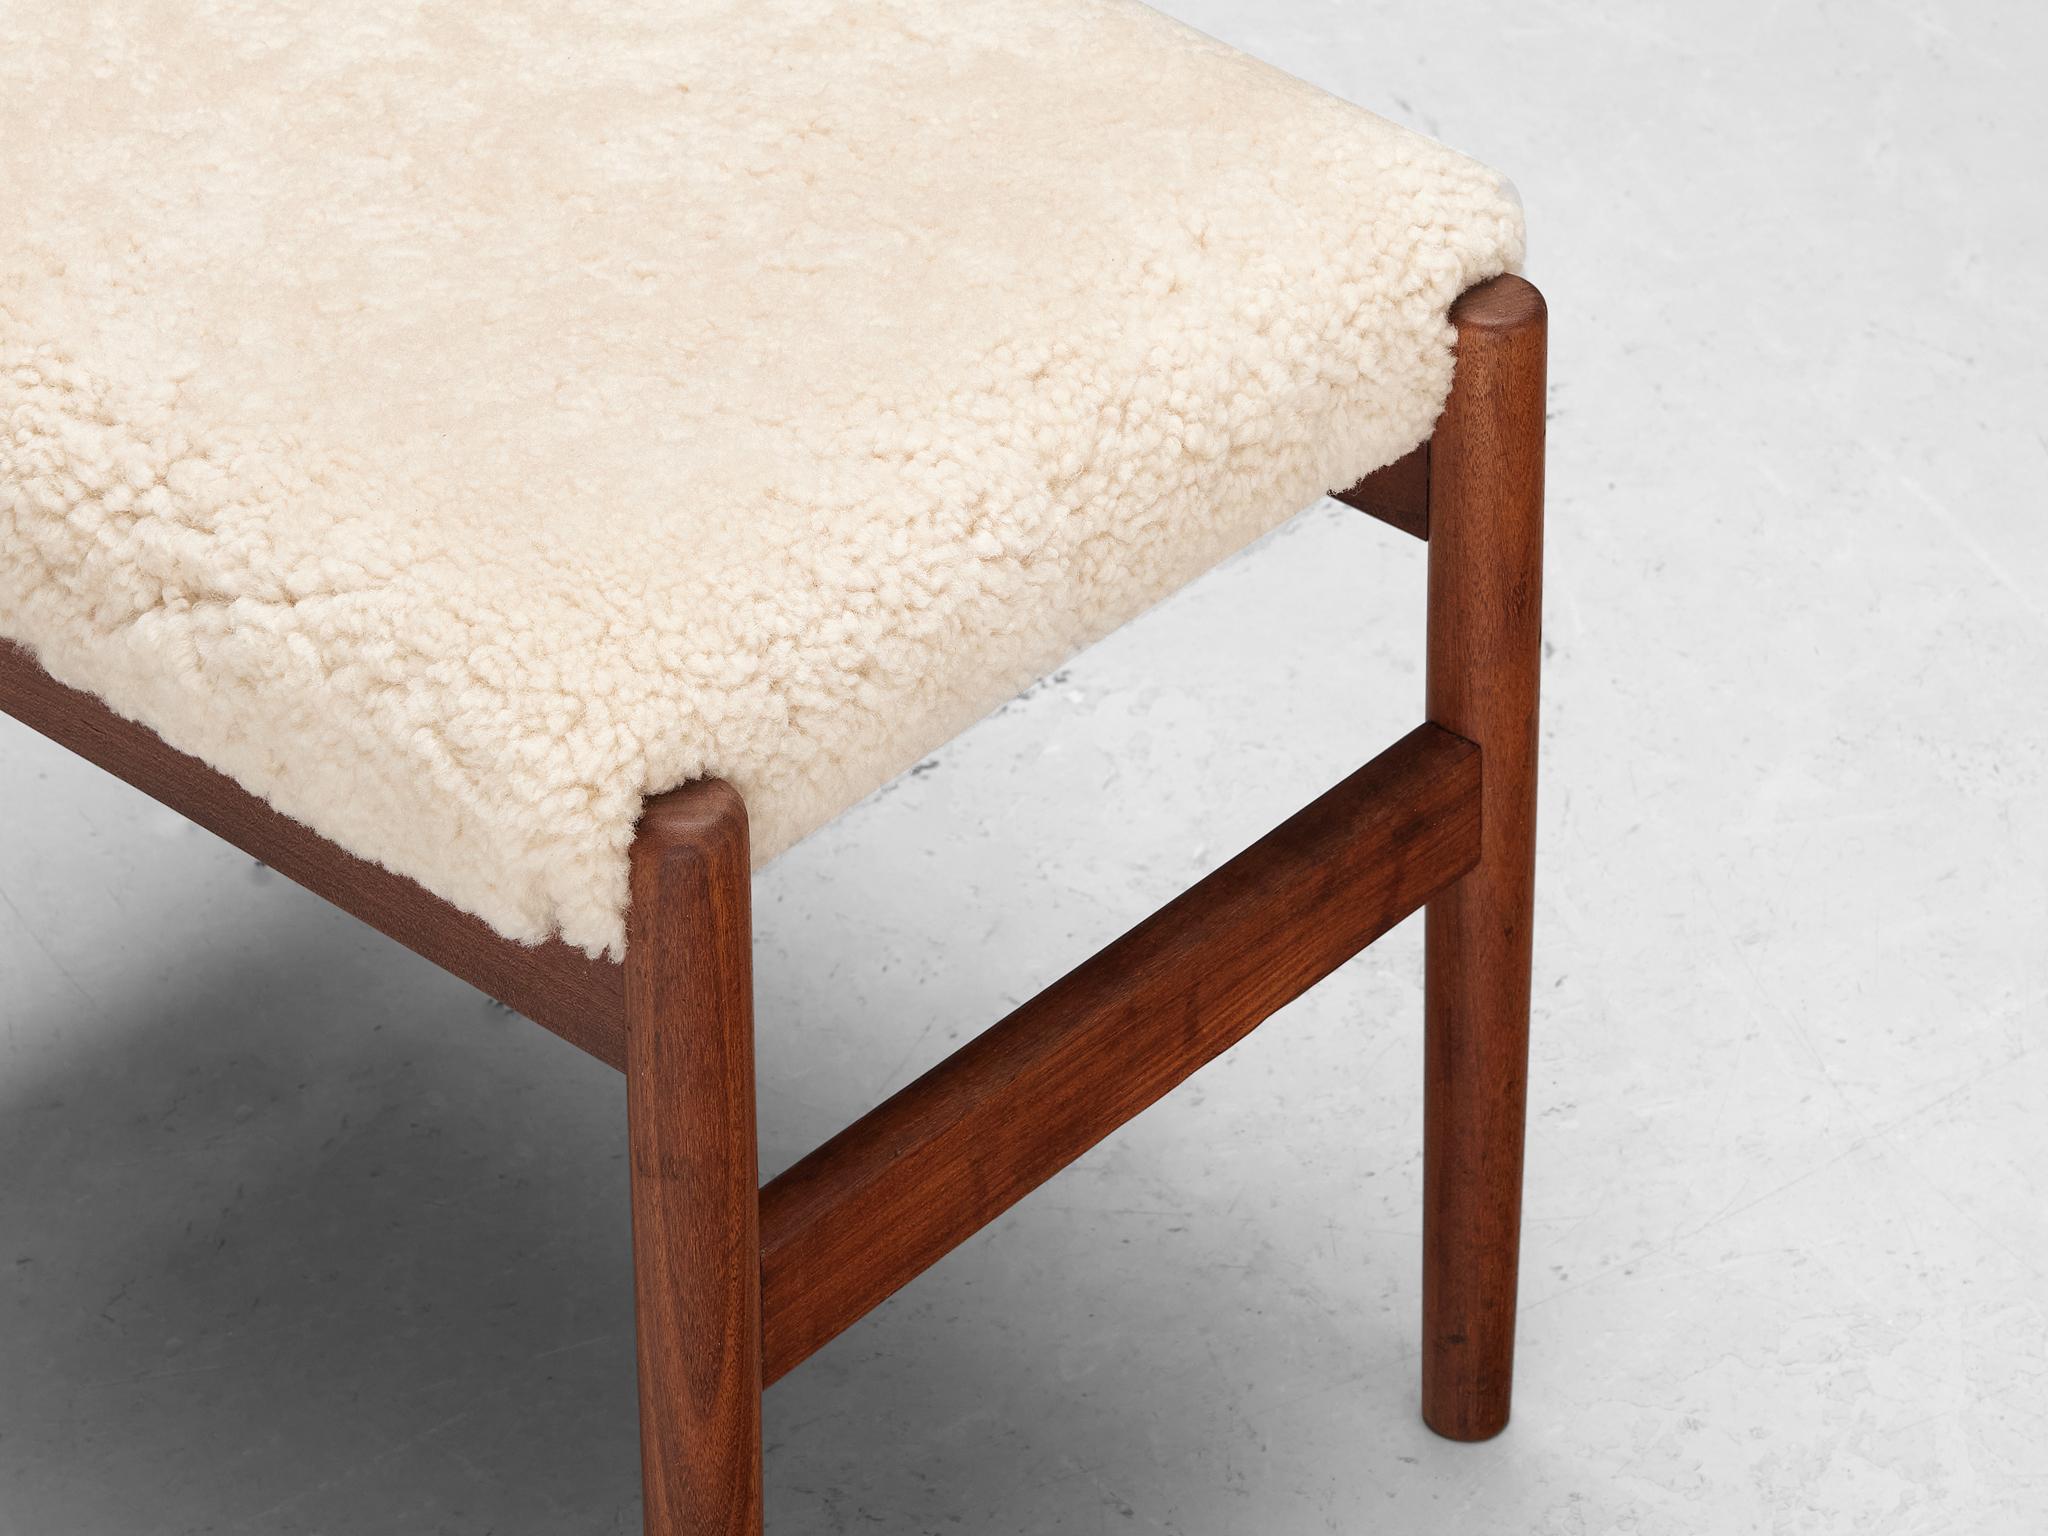 Scandinavian Stools in Teak and Shearling Upholstery